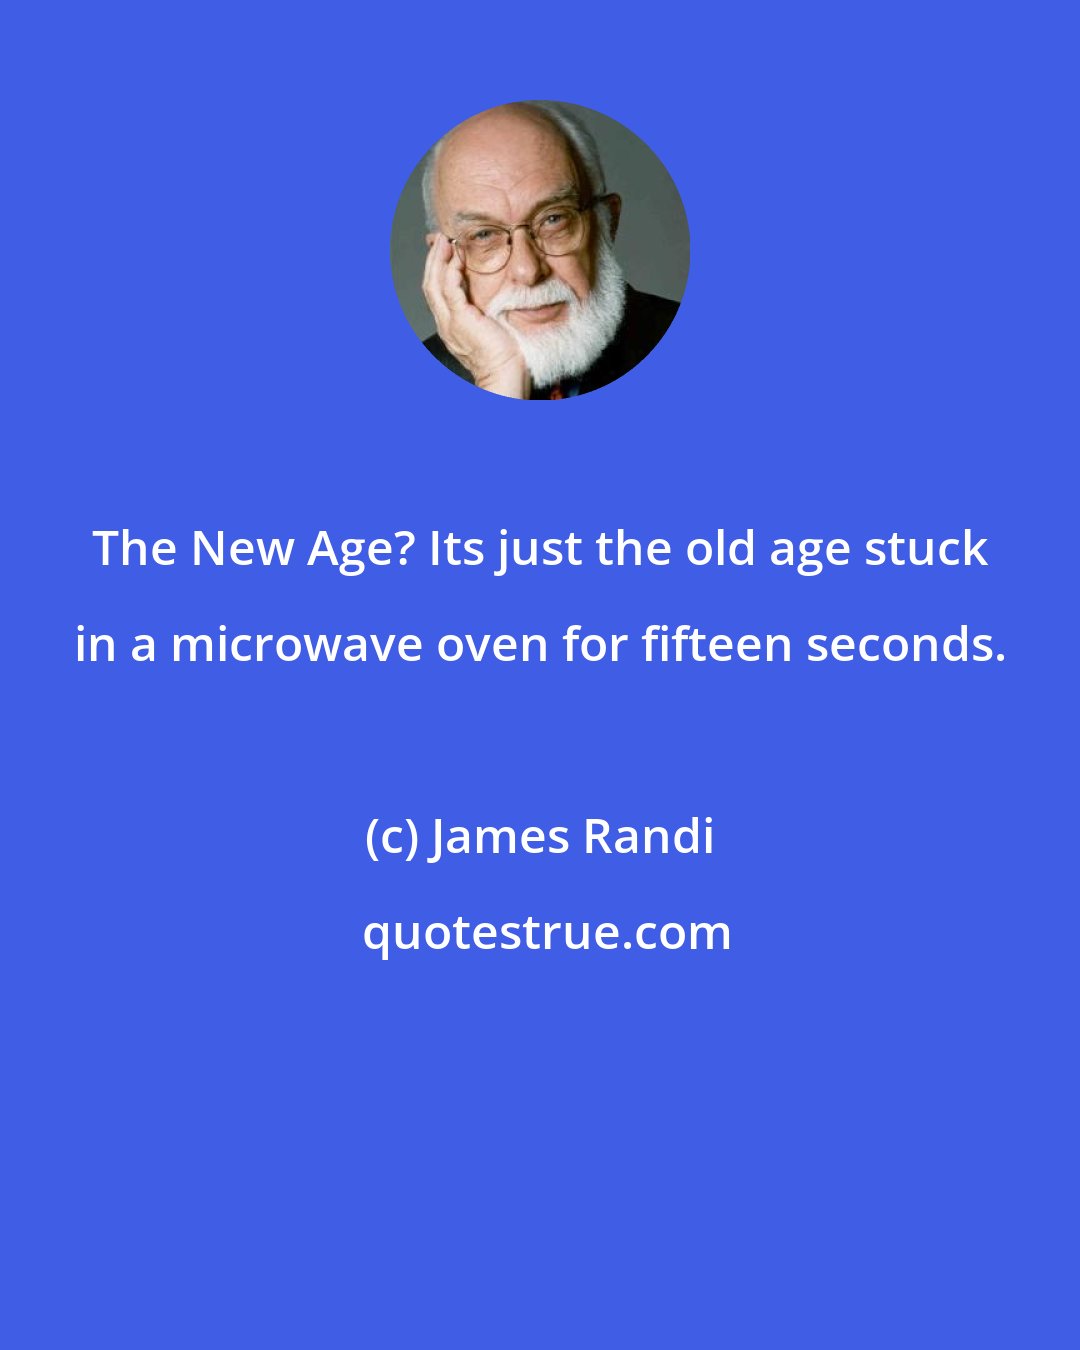 James Randi: The New Age? Its just the old age stuck in a microwave oven for fifteen seconds.